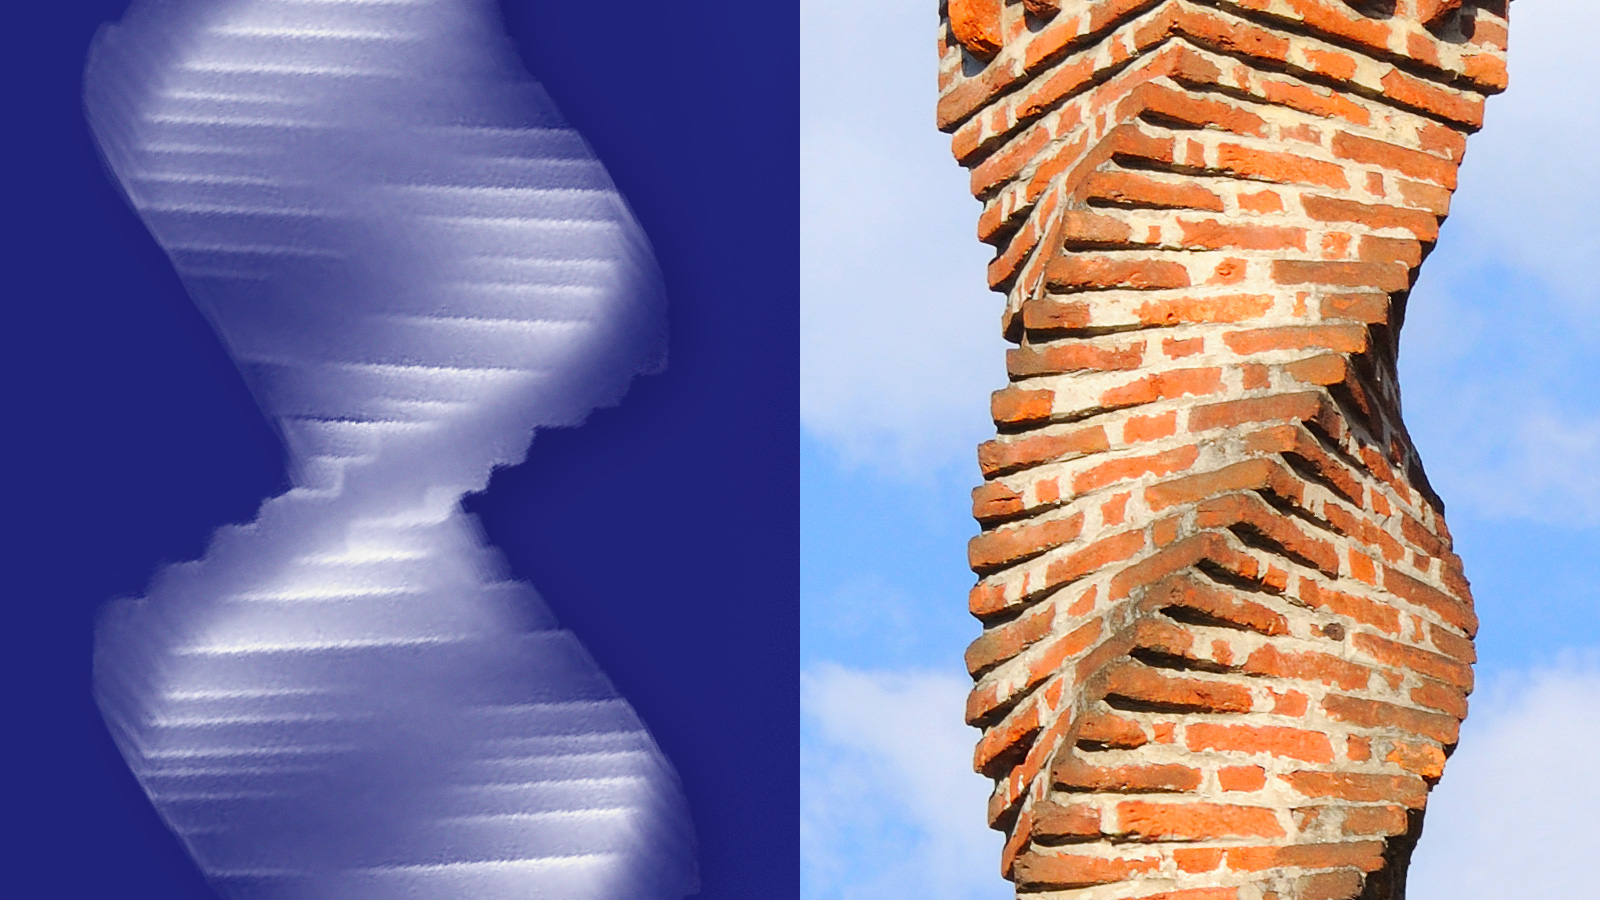 Helical structure of stacked bricks is similar to that produced by giving nanowires an Eshelby twist.